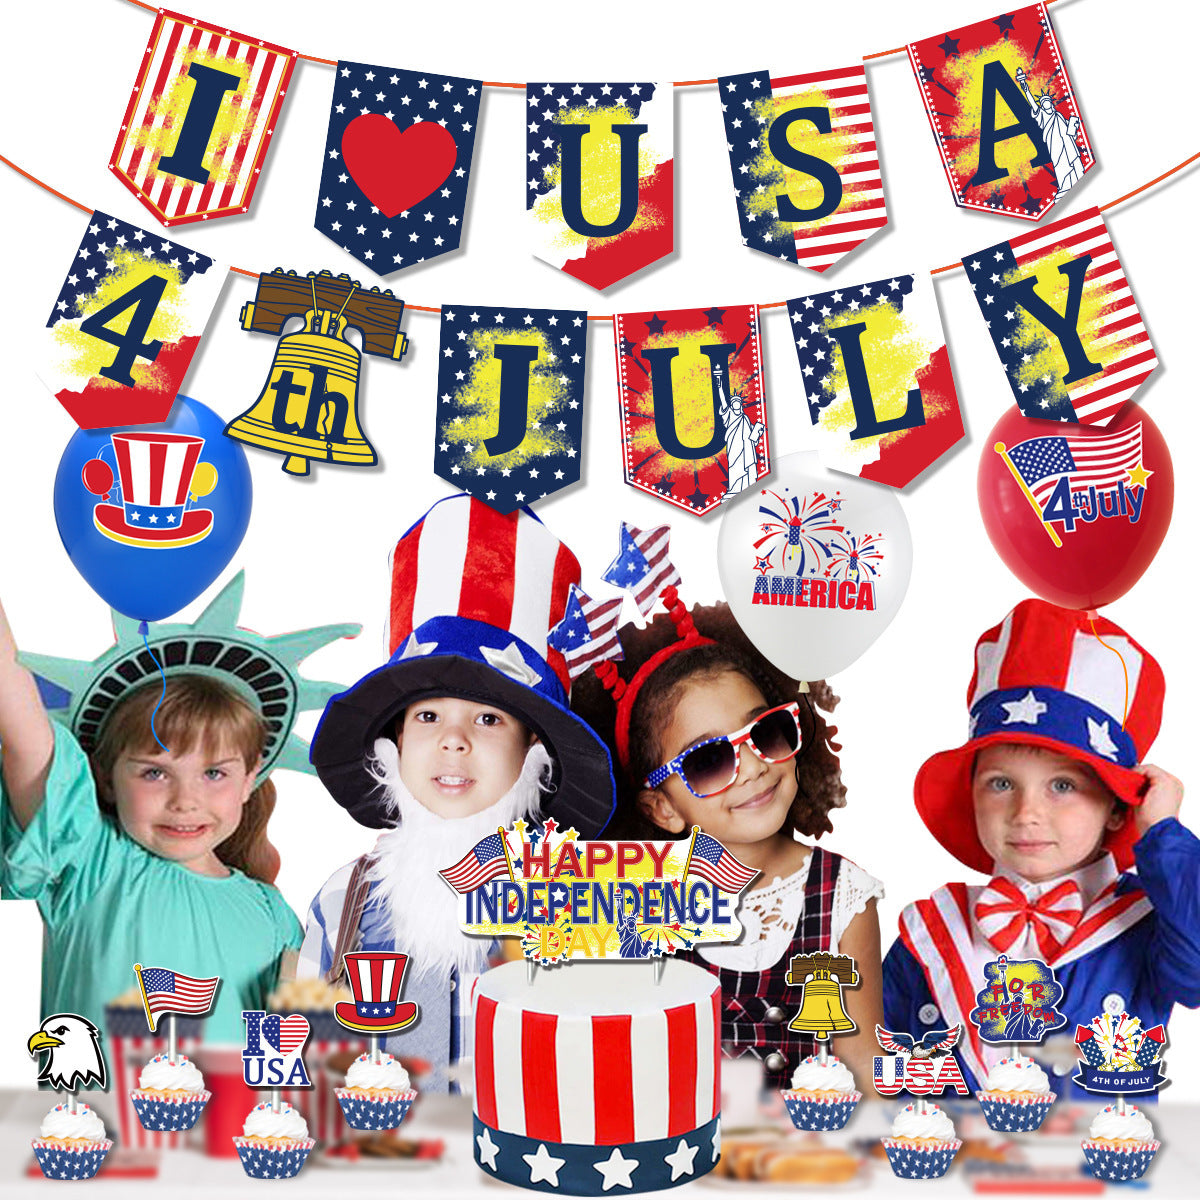 Independence Day Theme Party Decoration Supplies, 4th of July decorations, American flag decorations, Patriotic decorations, Red, white and blue decorations, July 4th wreaths, July 4th garlands, July 4th centerpieces, Fireworks decorations, July 4th banners, July 4th streamers, July 4th balloons, July 4th table runners, July 4th tablecloths, July 4th lights, July 4th outdoor decorations, Patriotic yard stakes, 